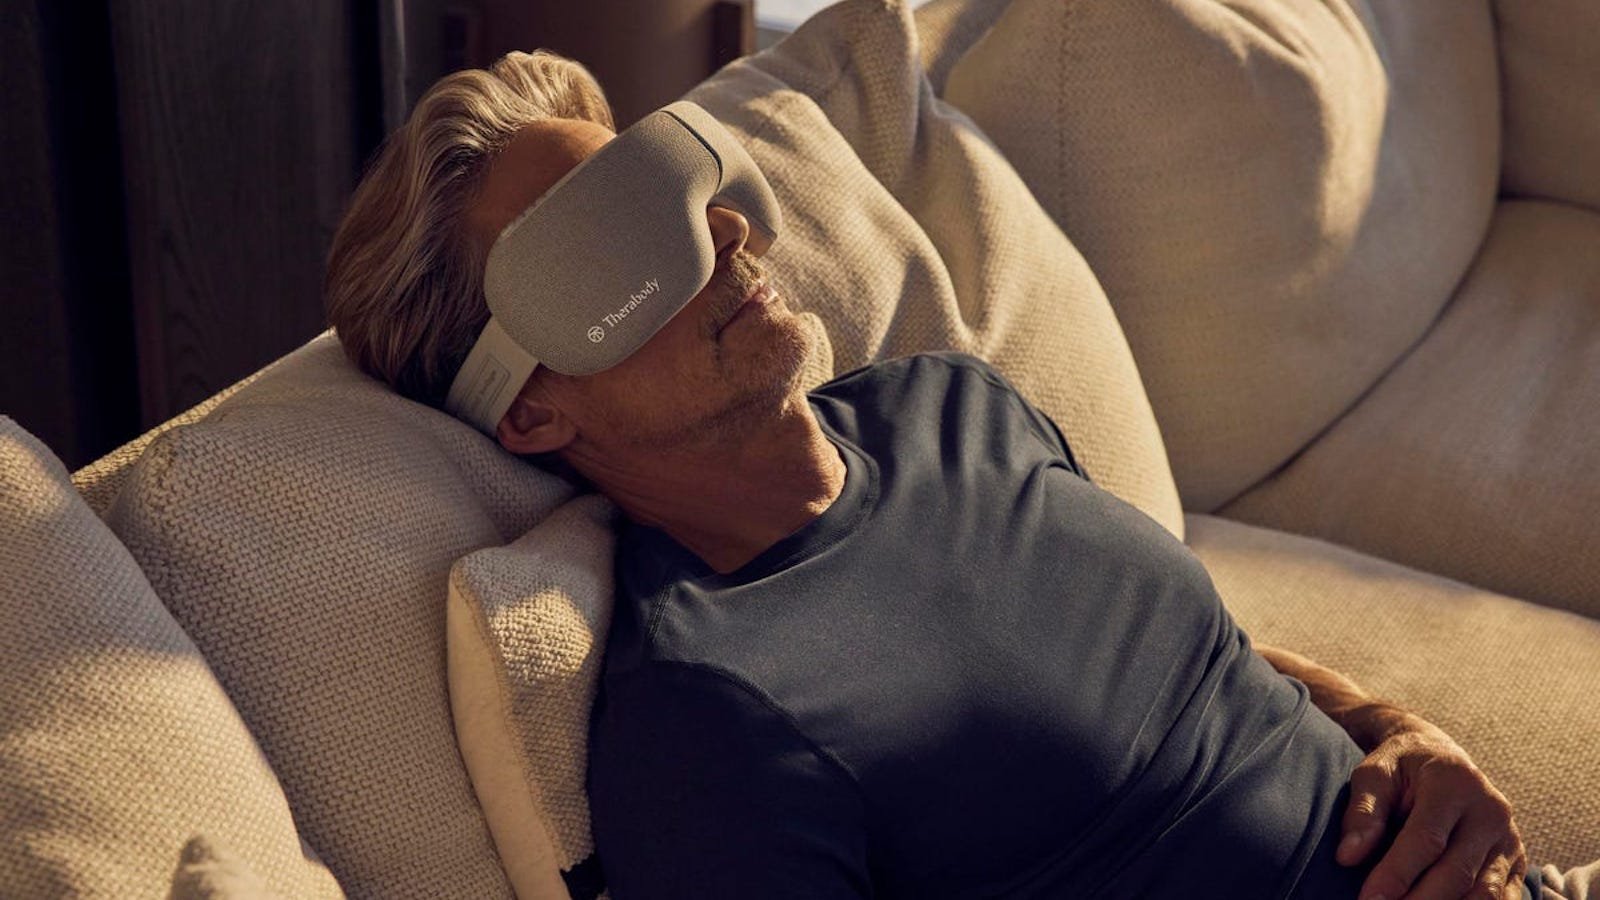 Therabody SmartGoggles smart wearable is exclusively designed for sleep, focus, and stress